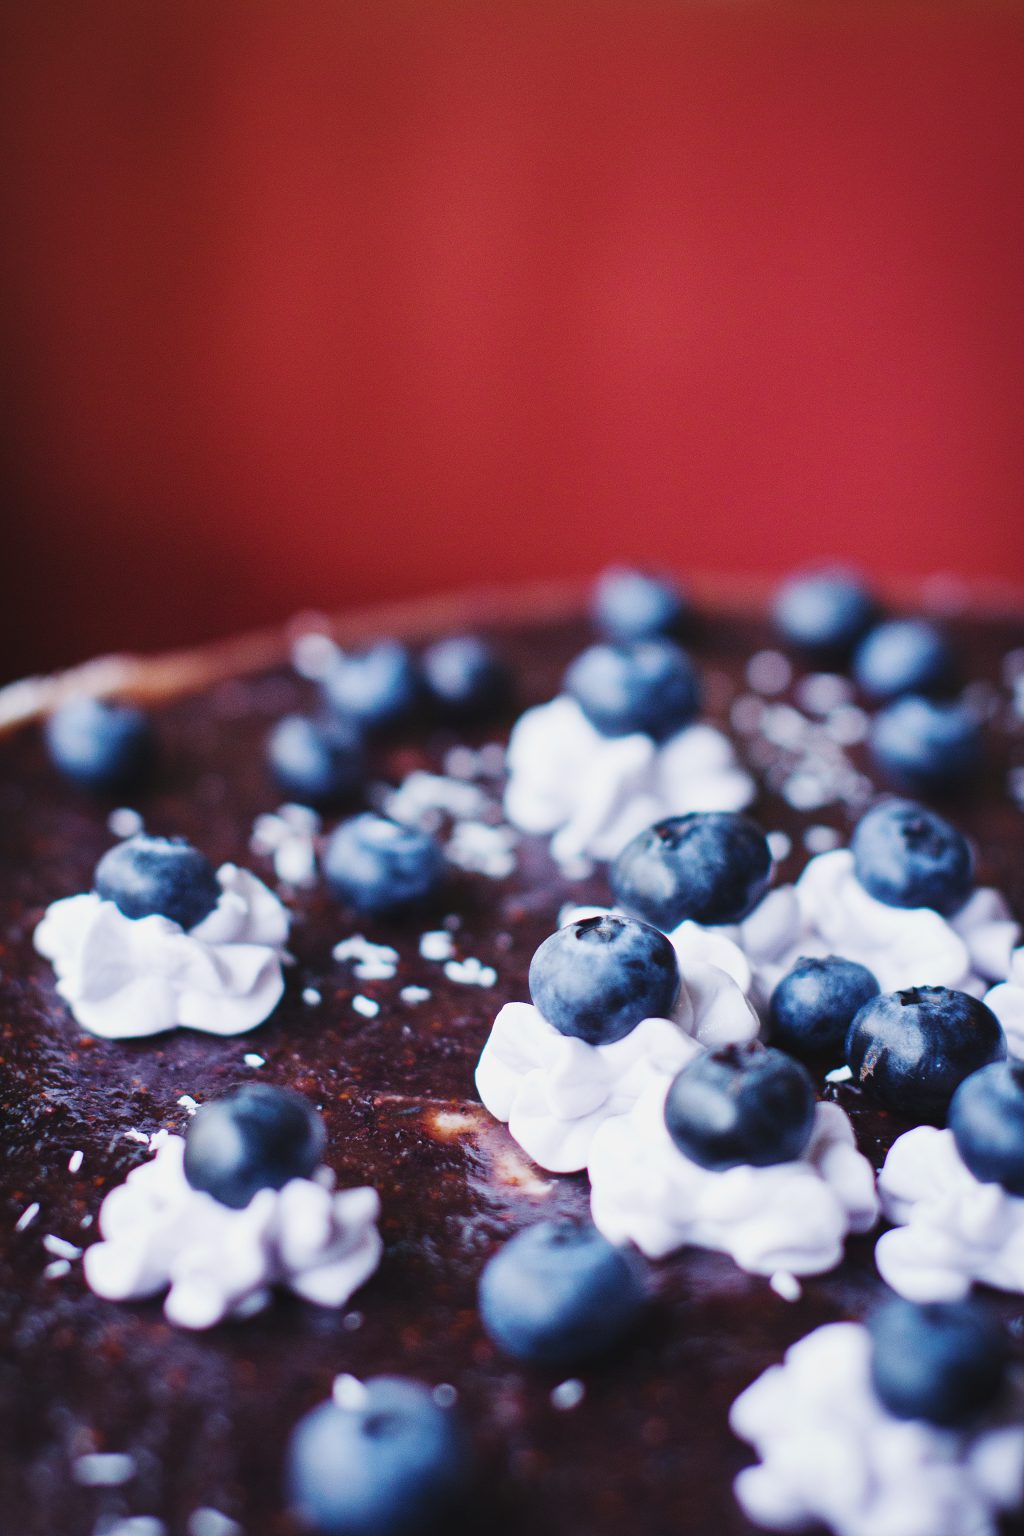 Coconut and blueberry cheesecake - free stock photo